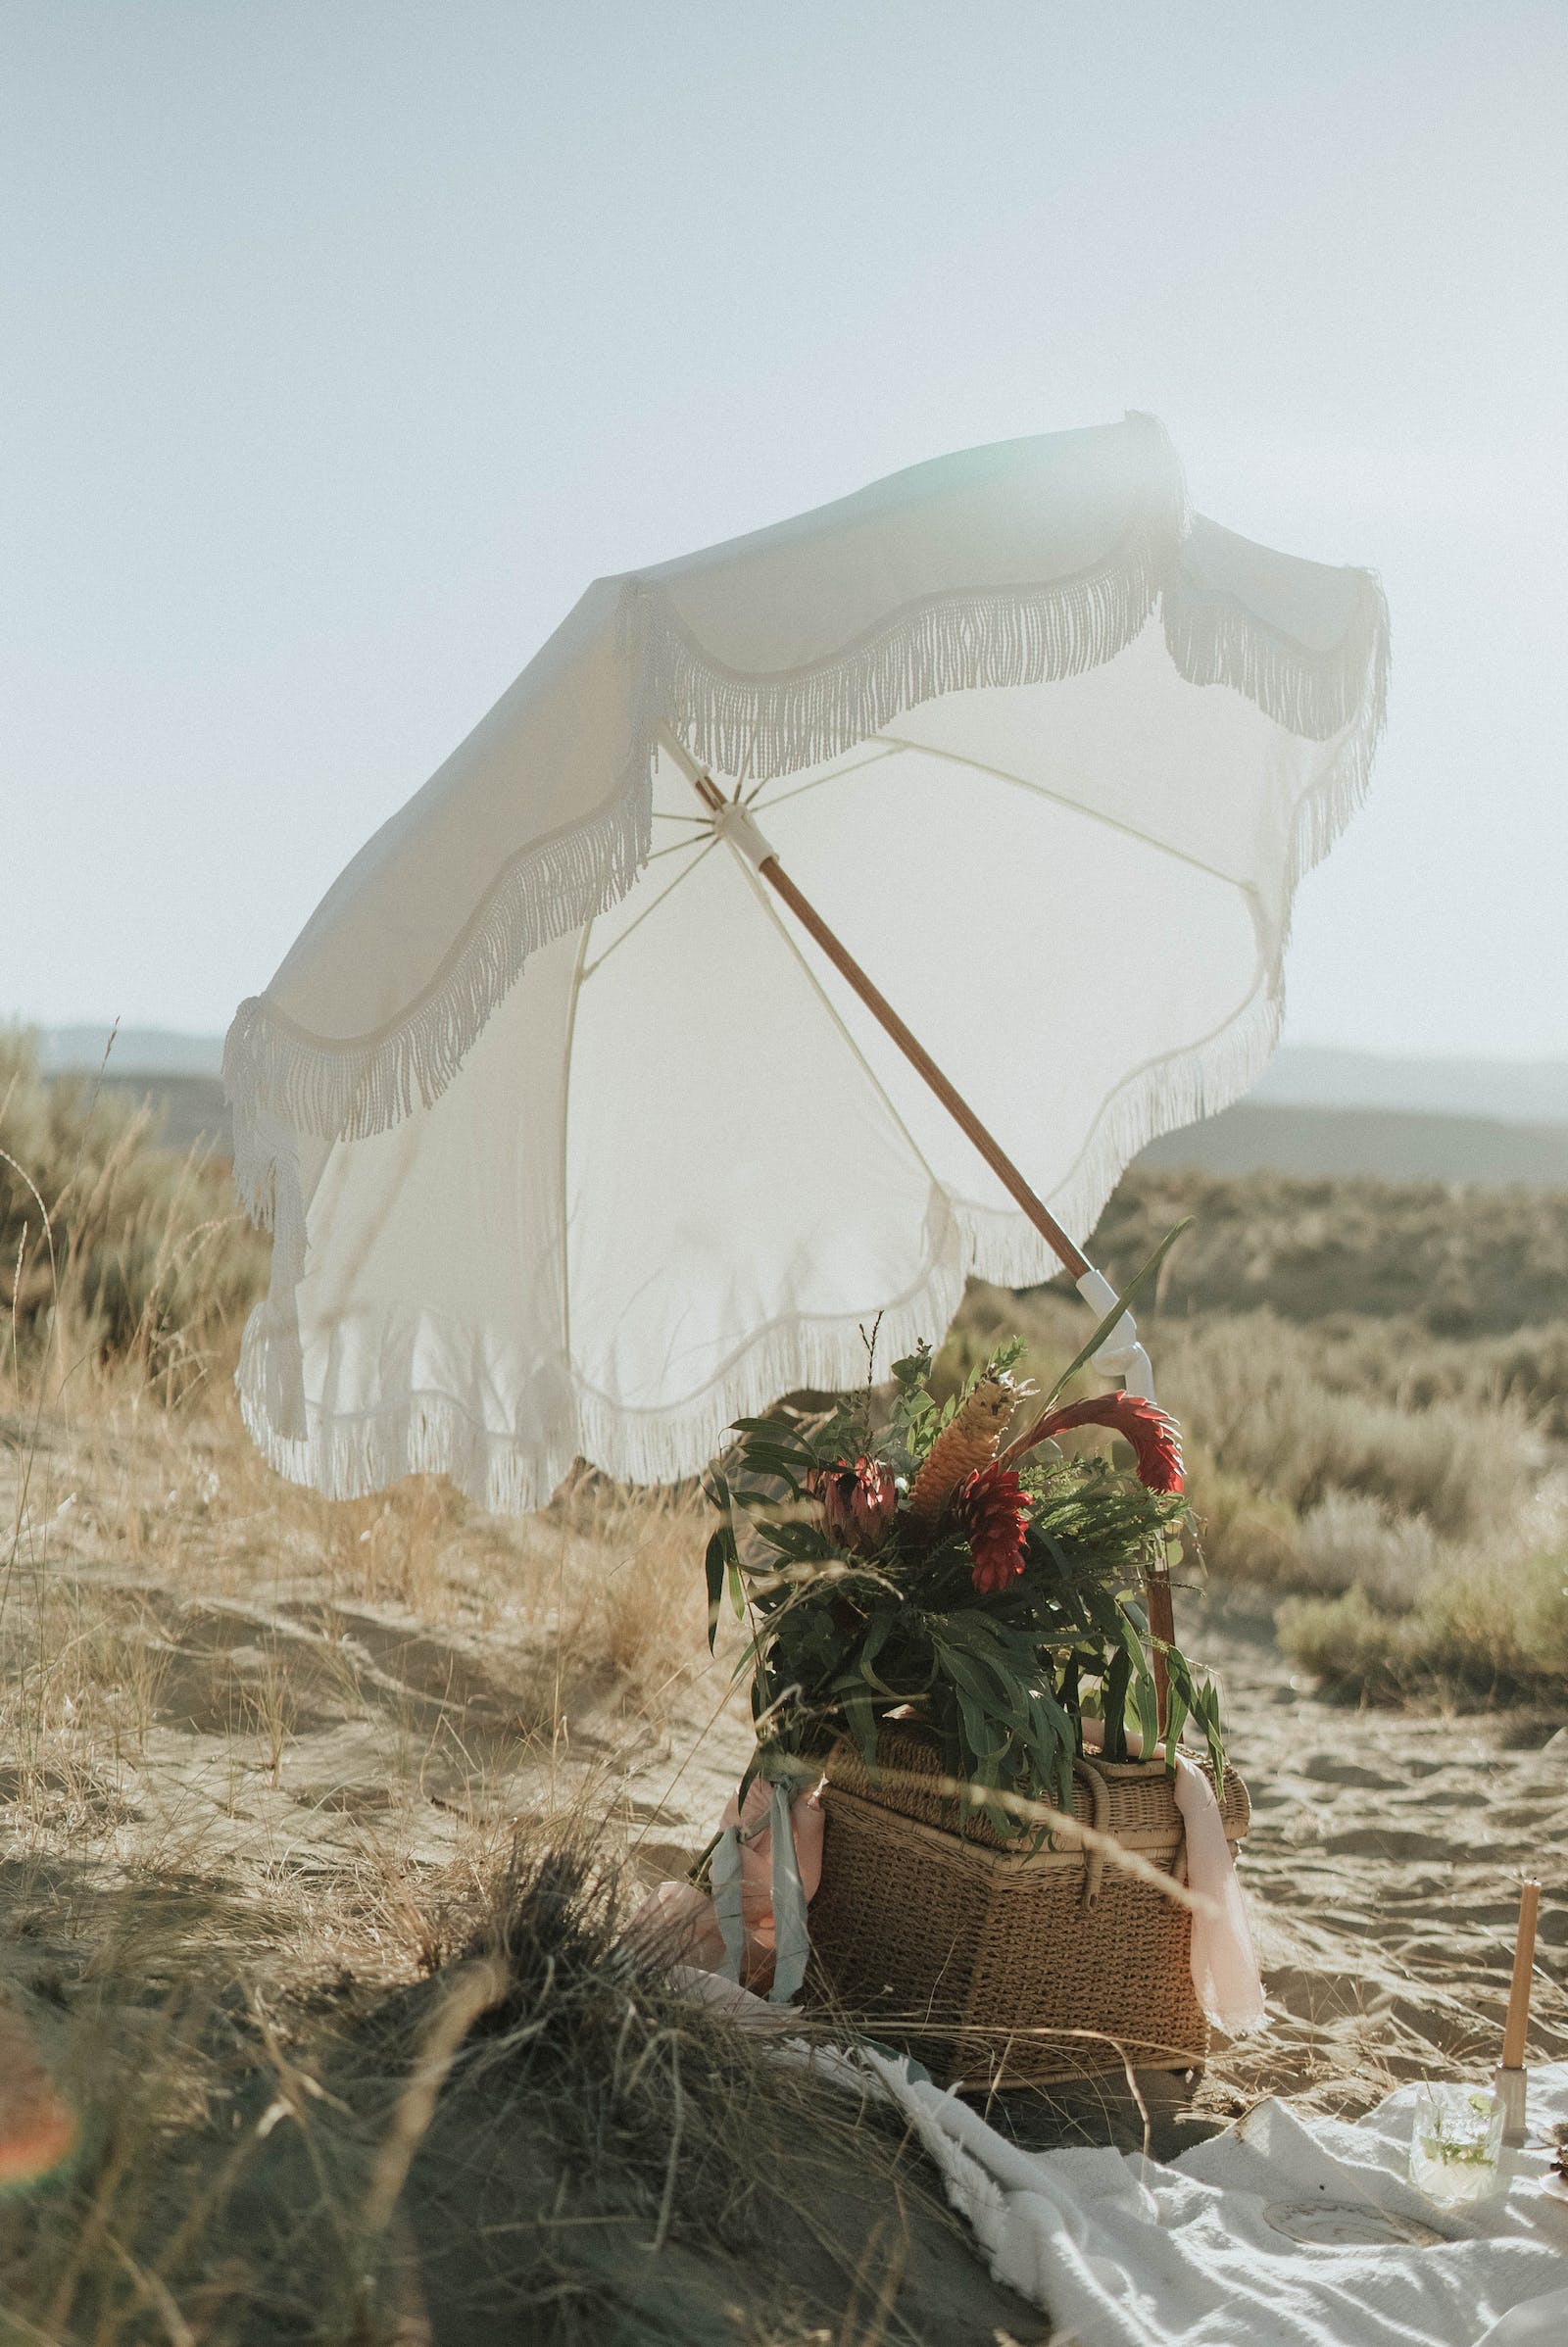 large white cloth parasol with tassles atop a picnic box and flowers resting in the dunes of a beach